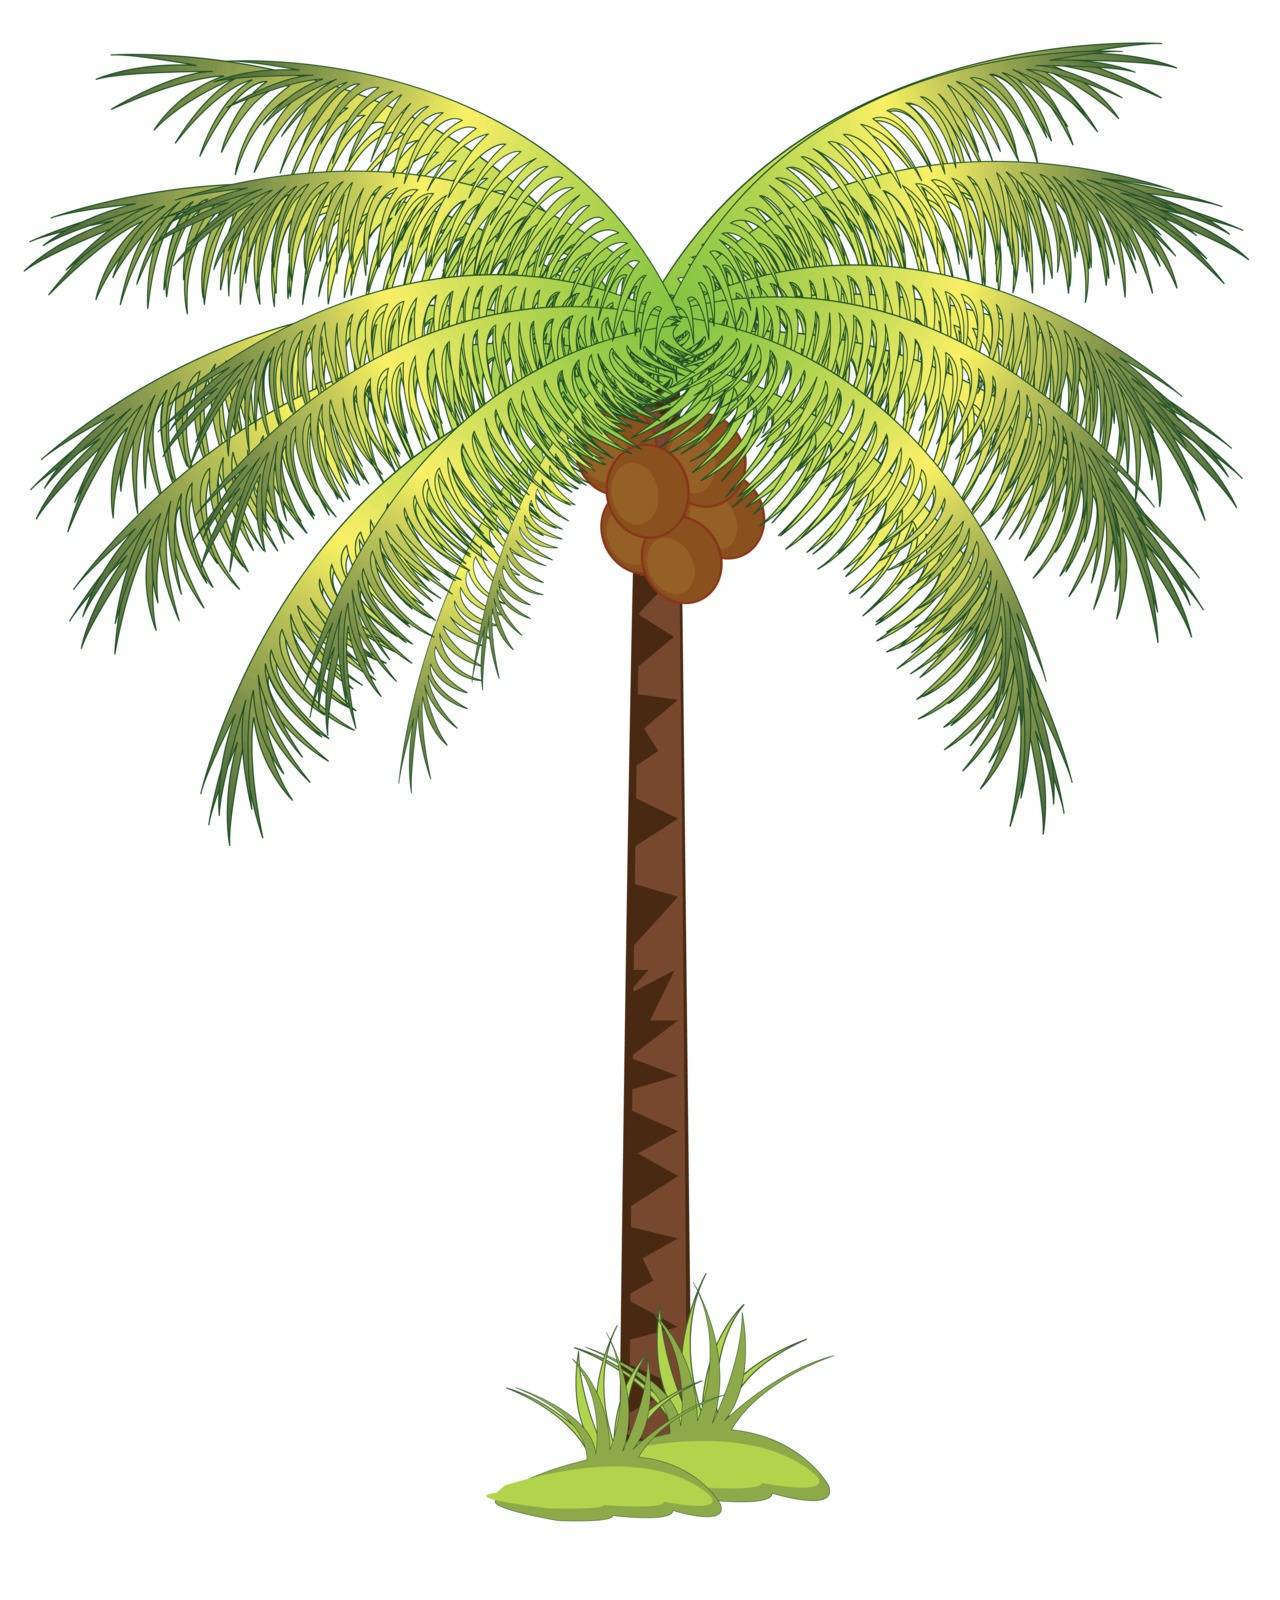 The Tropical tree palm with fruit coco.Vector illustration